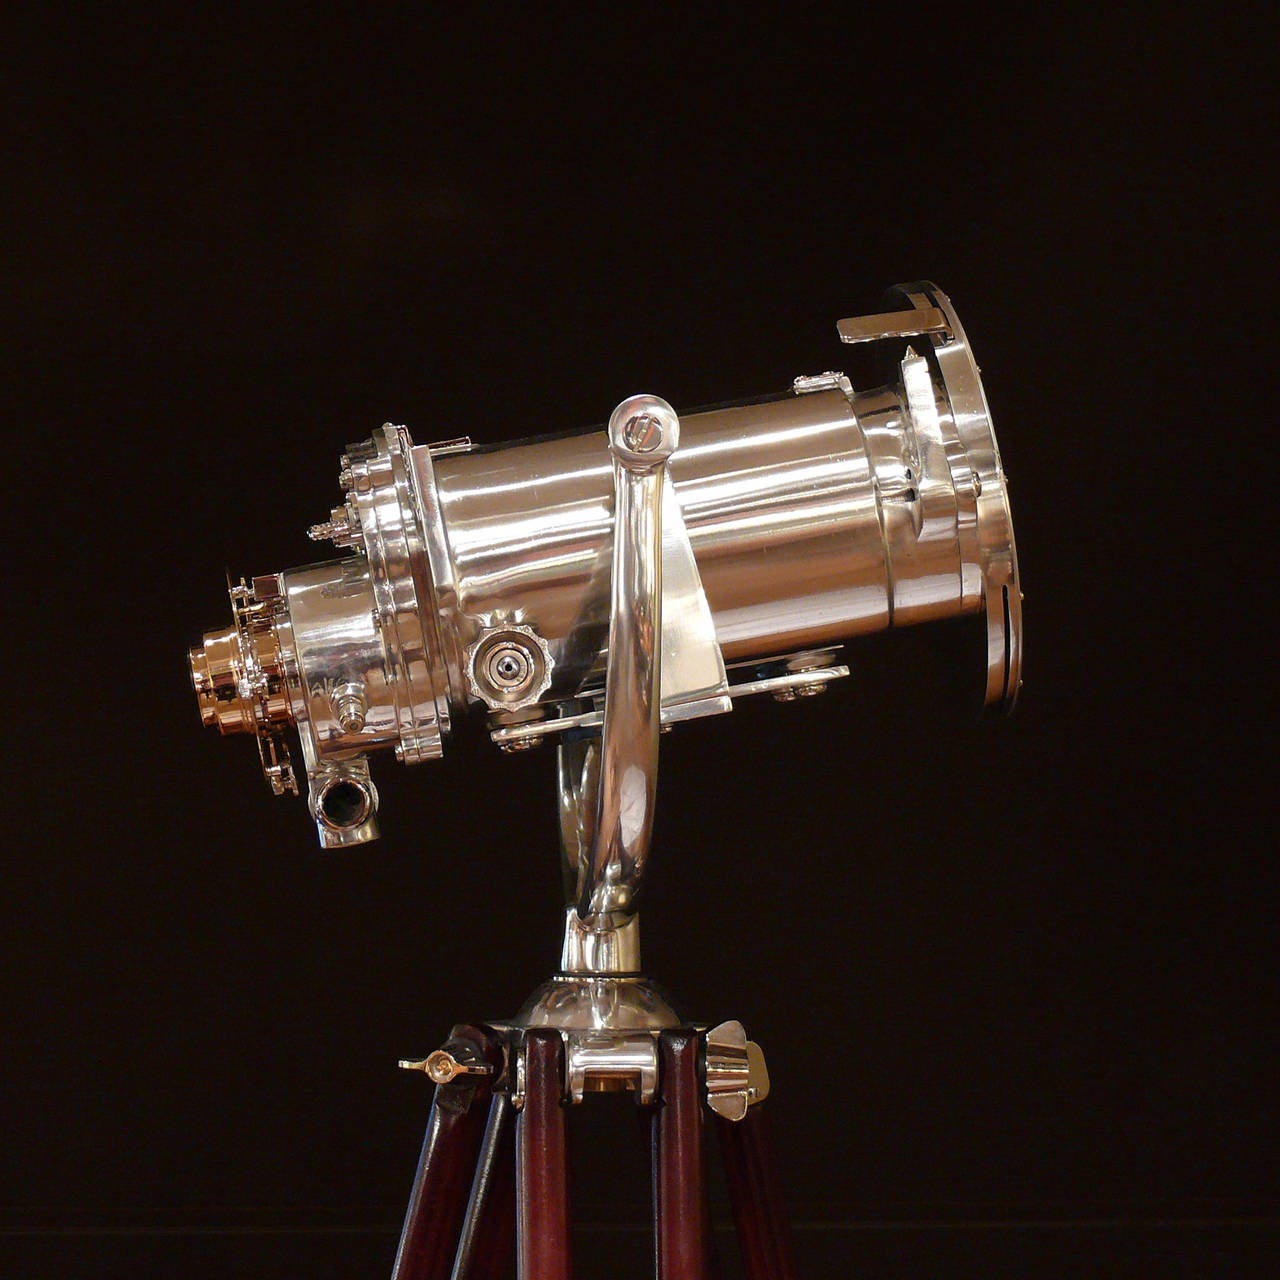 A splendid naval binocular gunsight with 10 power magnification and 70mm lenses by Ross of London, circa 1940. These binoculars have been stripped of their original paint and polished to a mirror finish, they have then been mounted on a period